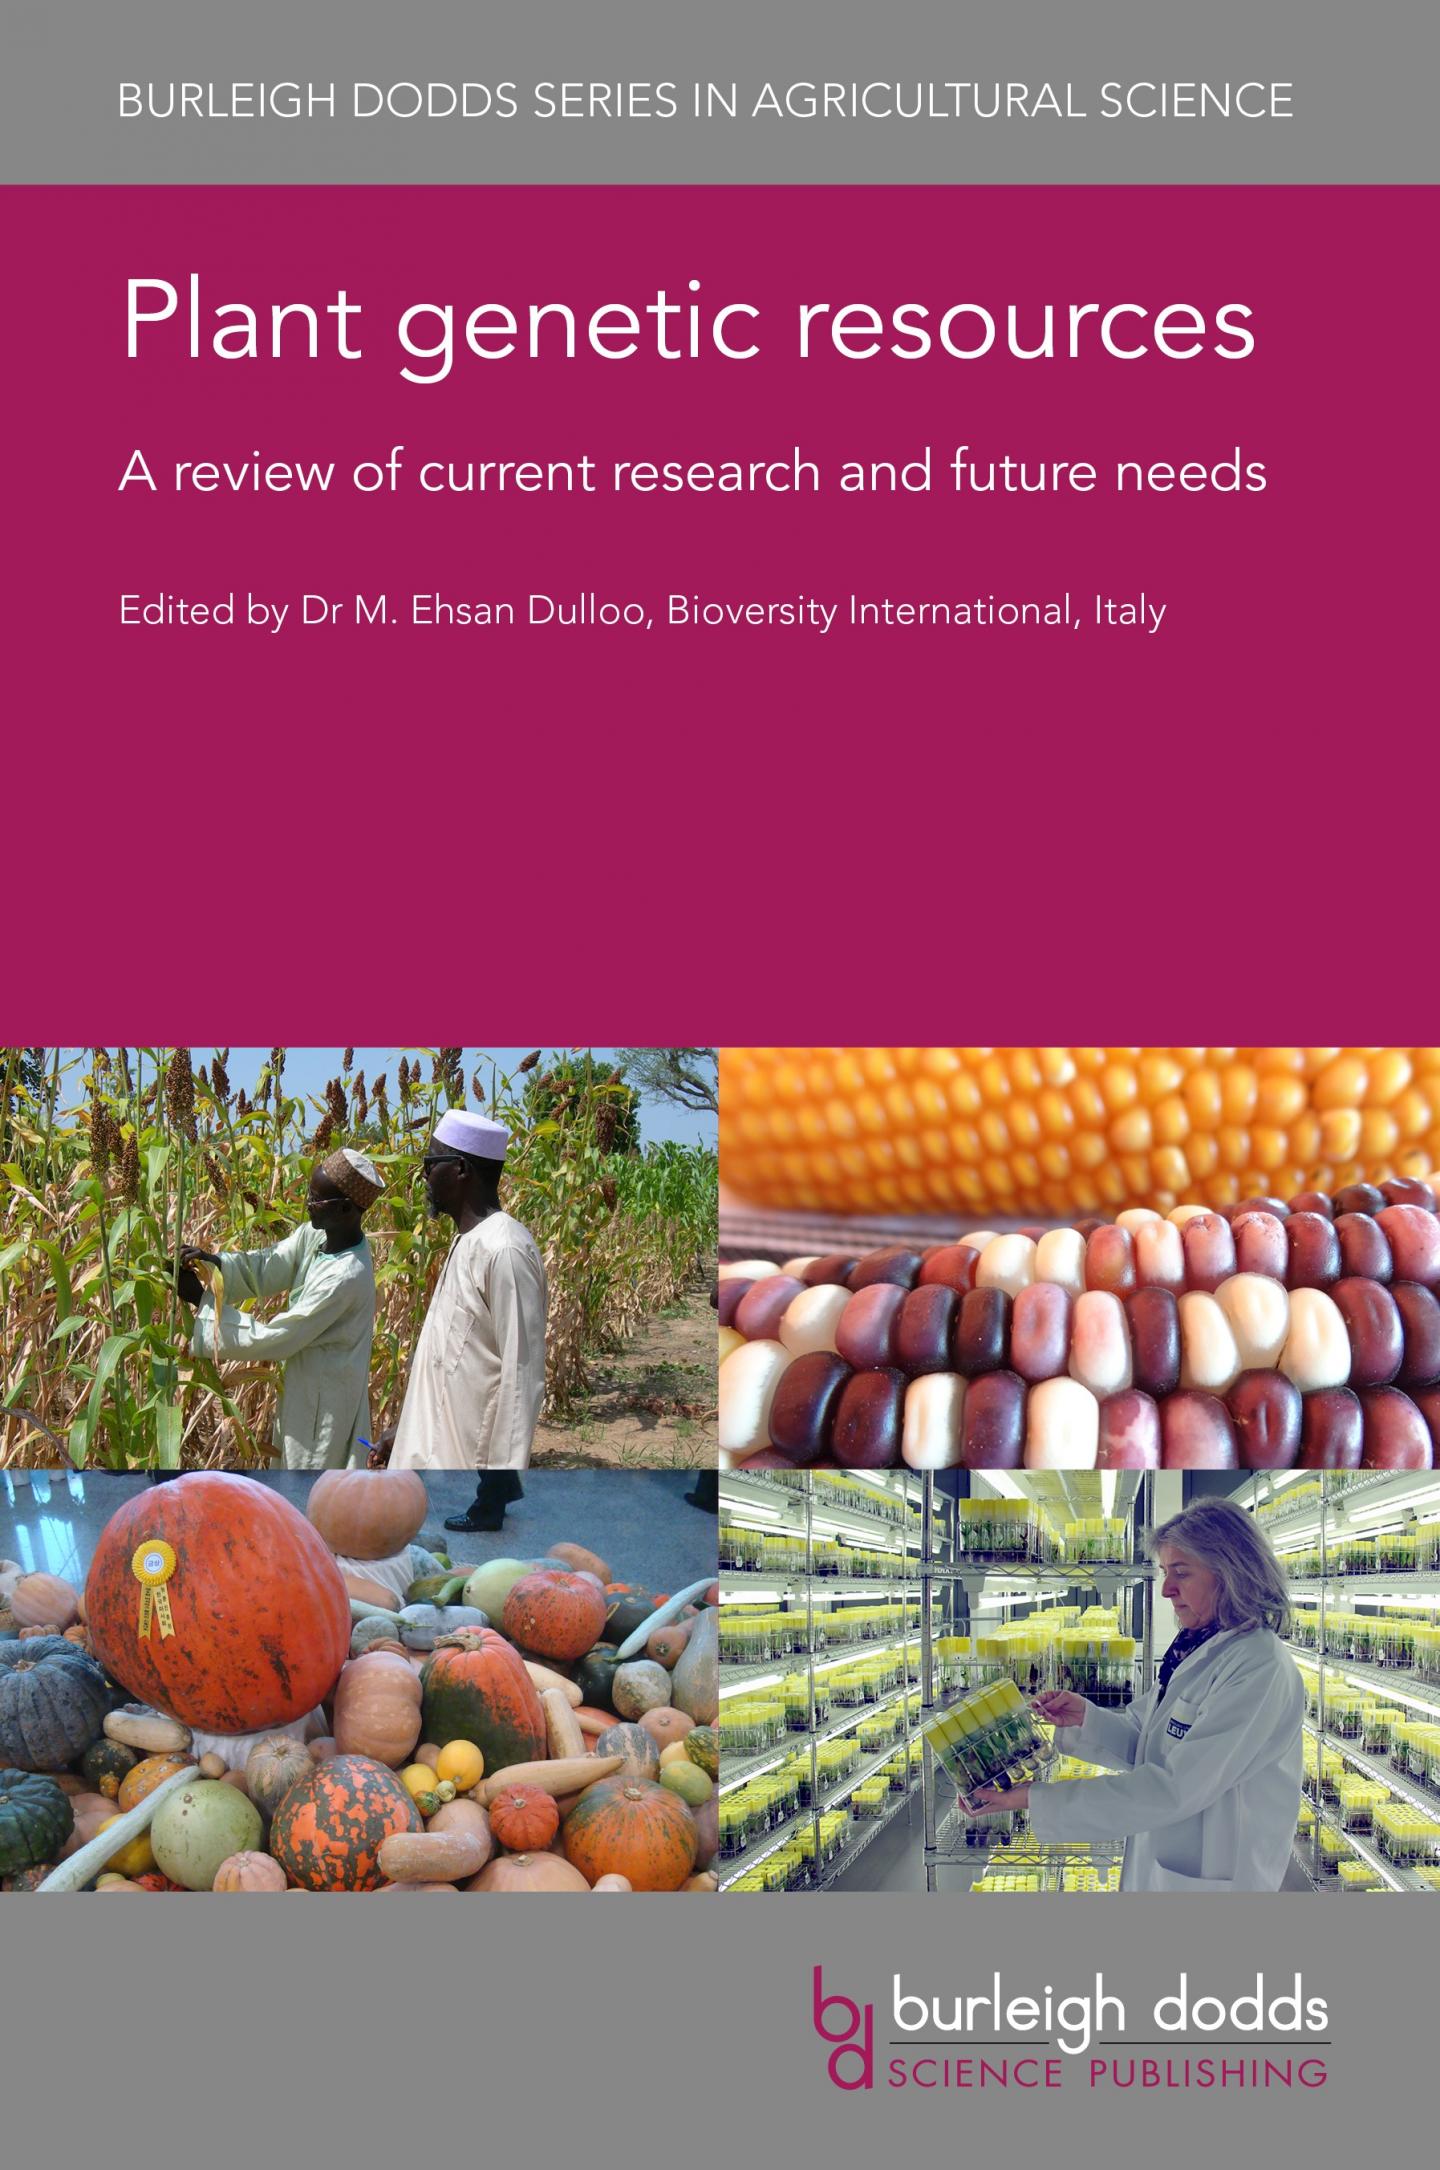 Plant genetic resources: A review of current research and future needs